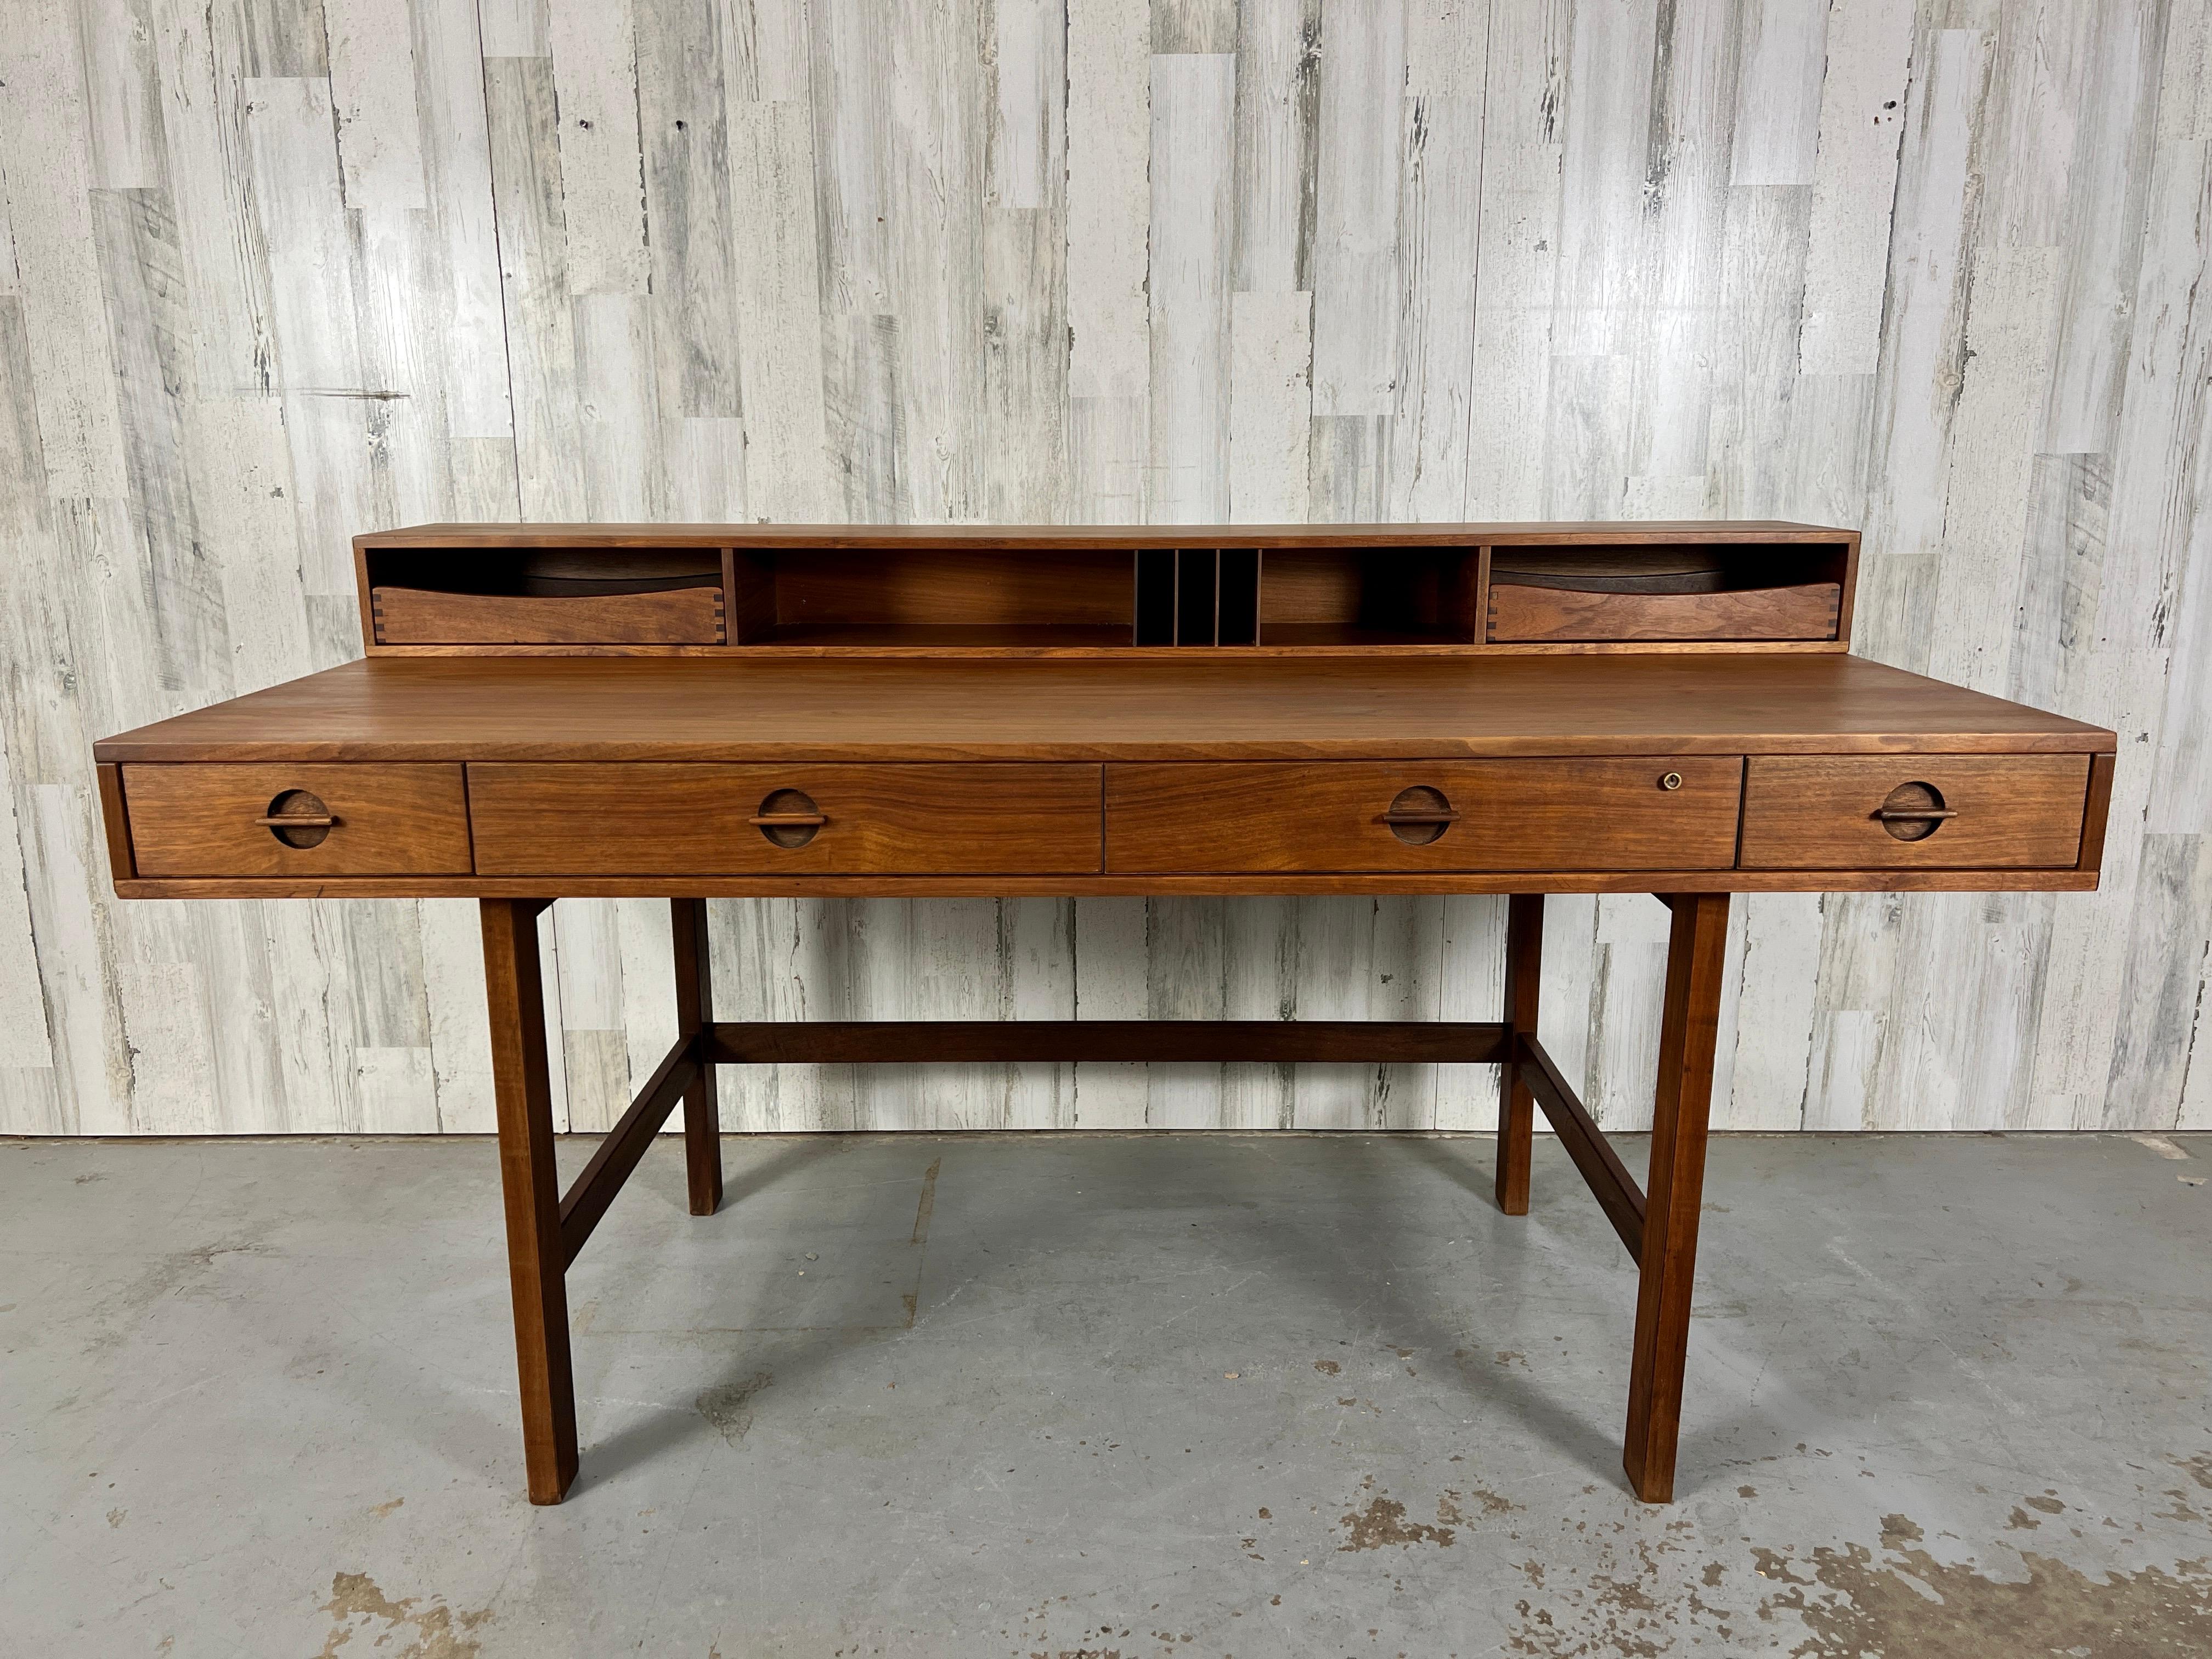 Danish Modern Teak Flip Top Desk by Peter Lovig Nielsen. The top flips down to be transformed into a partners desk or can remain upright for storage. 
When desk is open it measures: 38